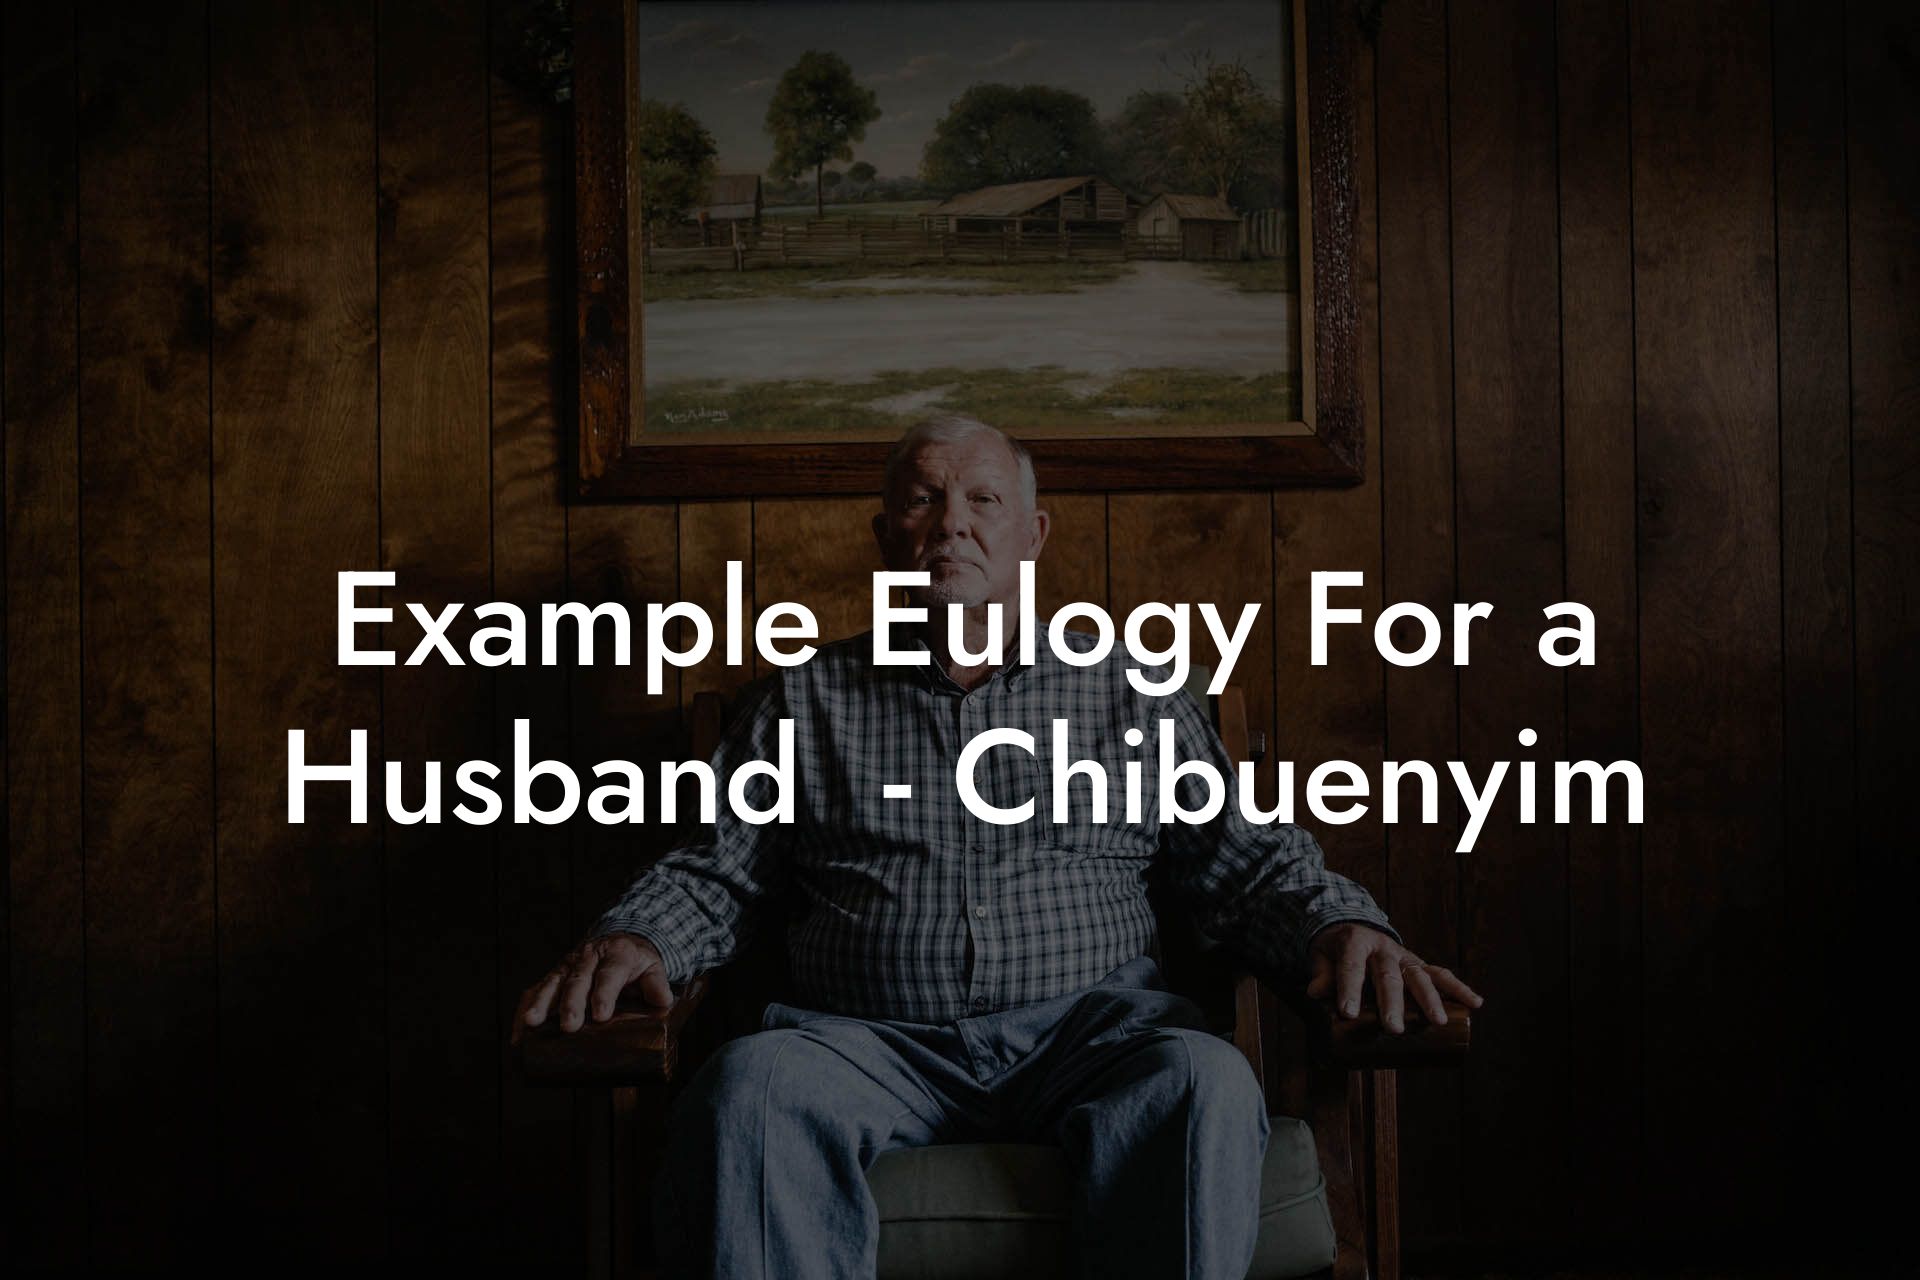 Example Eulogy For a Husband  - Chibuenyim